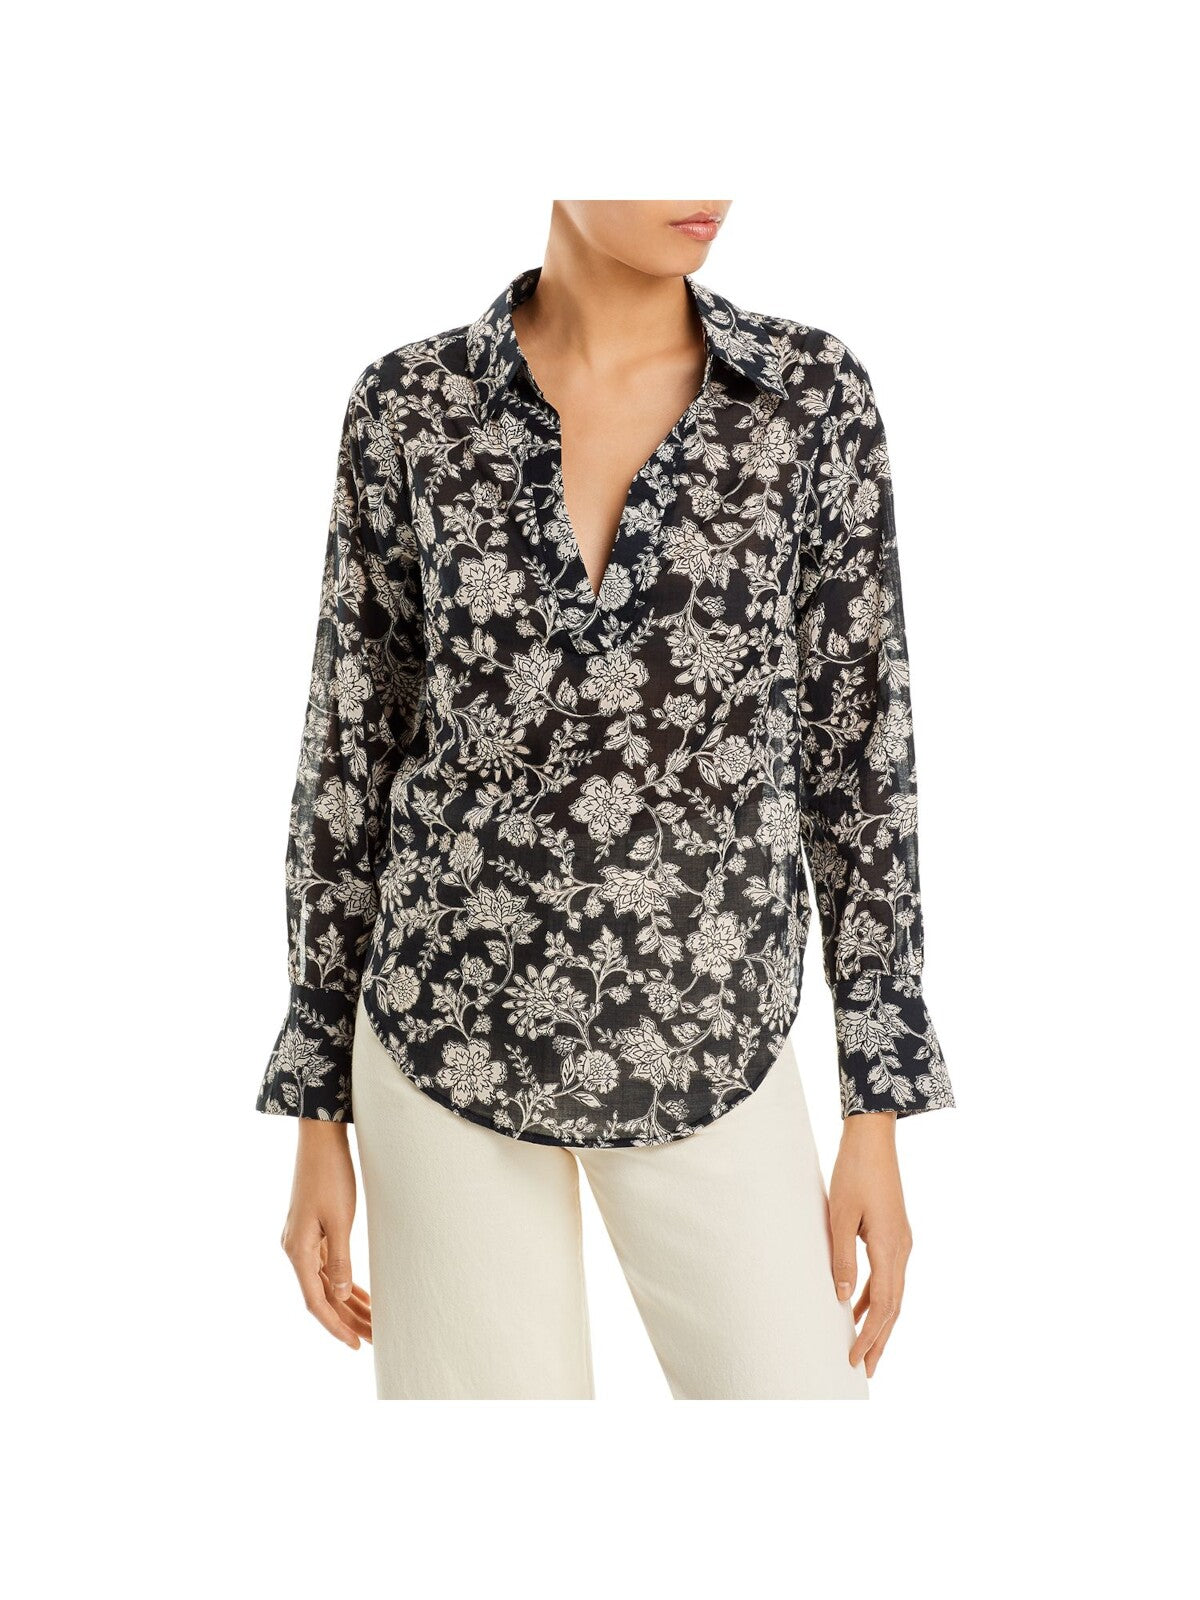 AQUA Womens Black Floral Long Sleeve Collared Blouse S